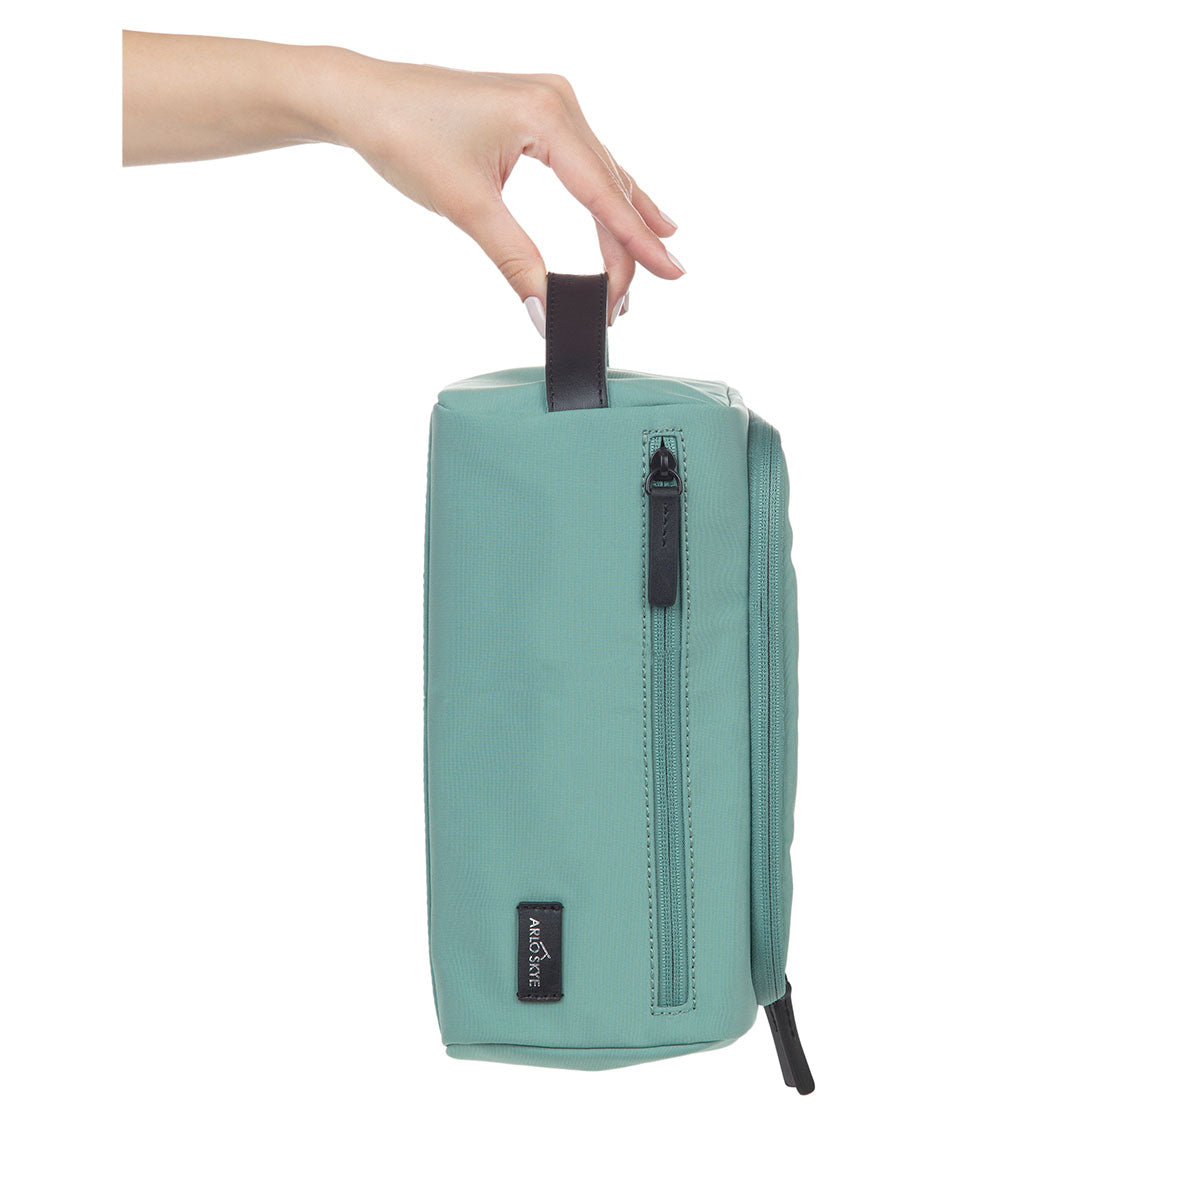 toiletry bag in mint color showing exterior view in vertical orientation.